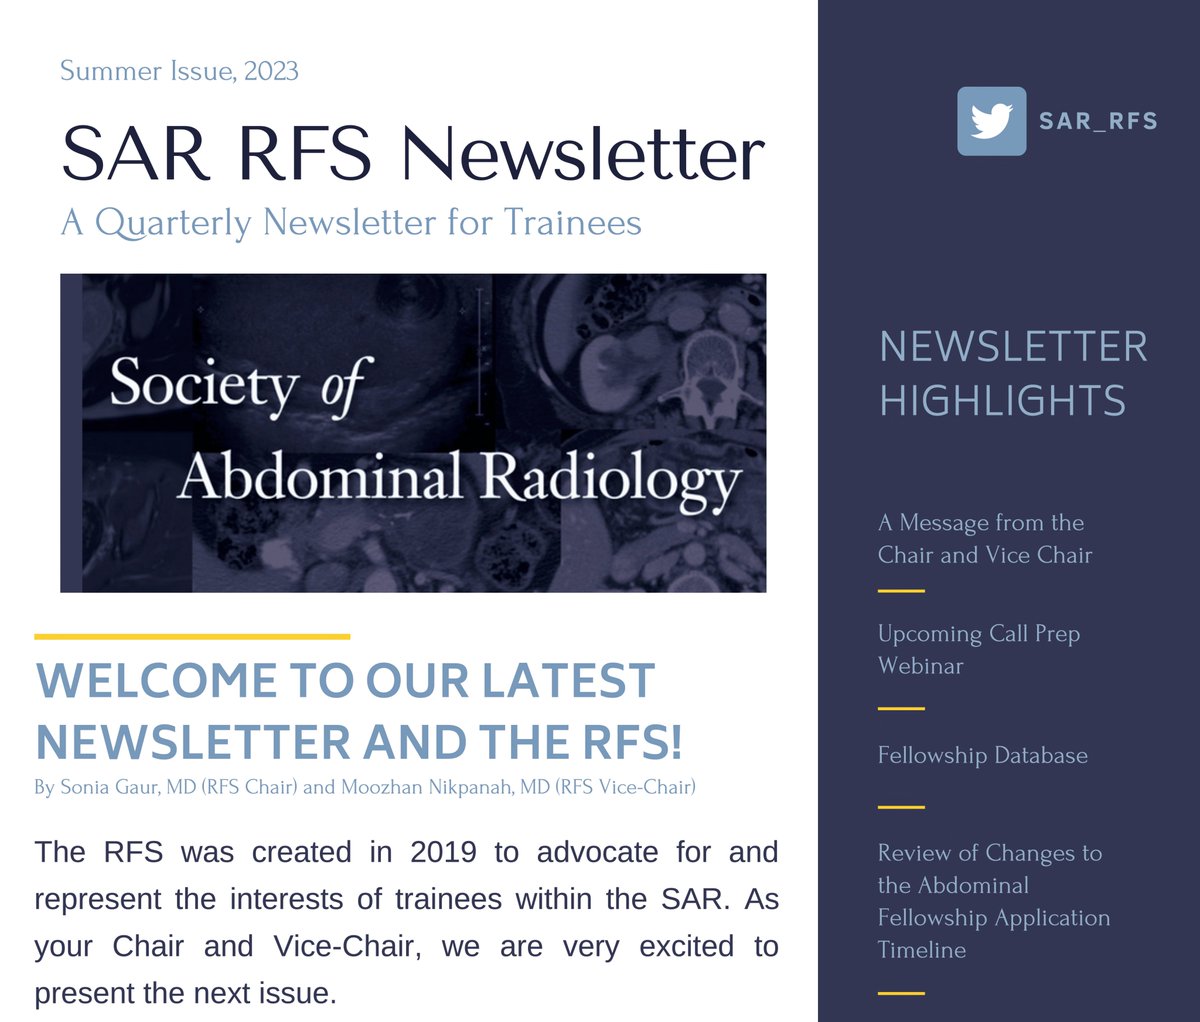 Attention radiology trainees! #FutureRadRes #RadRes #RadFellows We're so excited to share the latest edition of our @SAR_RFS Newsletter, featuring our SAR Call Prep webinar, PDAR Q&A session with Dr. Jess Fried, and many more! Check it out👇
rb.gy/1wmkv